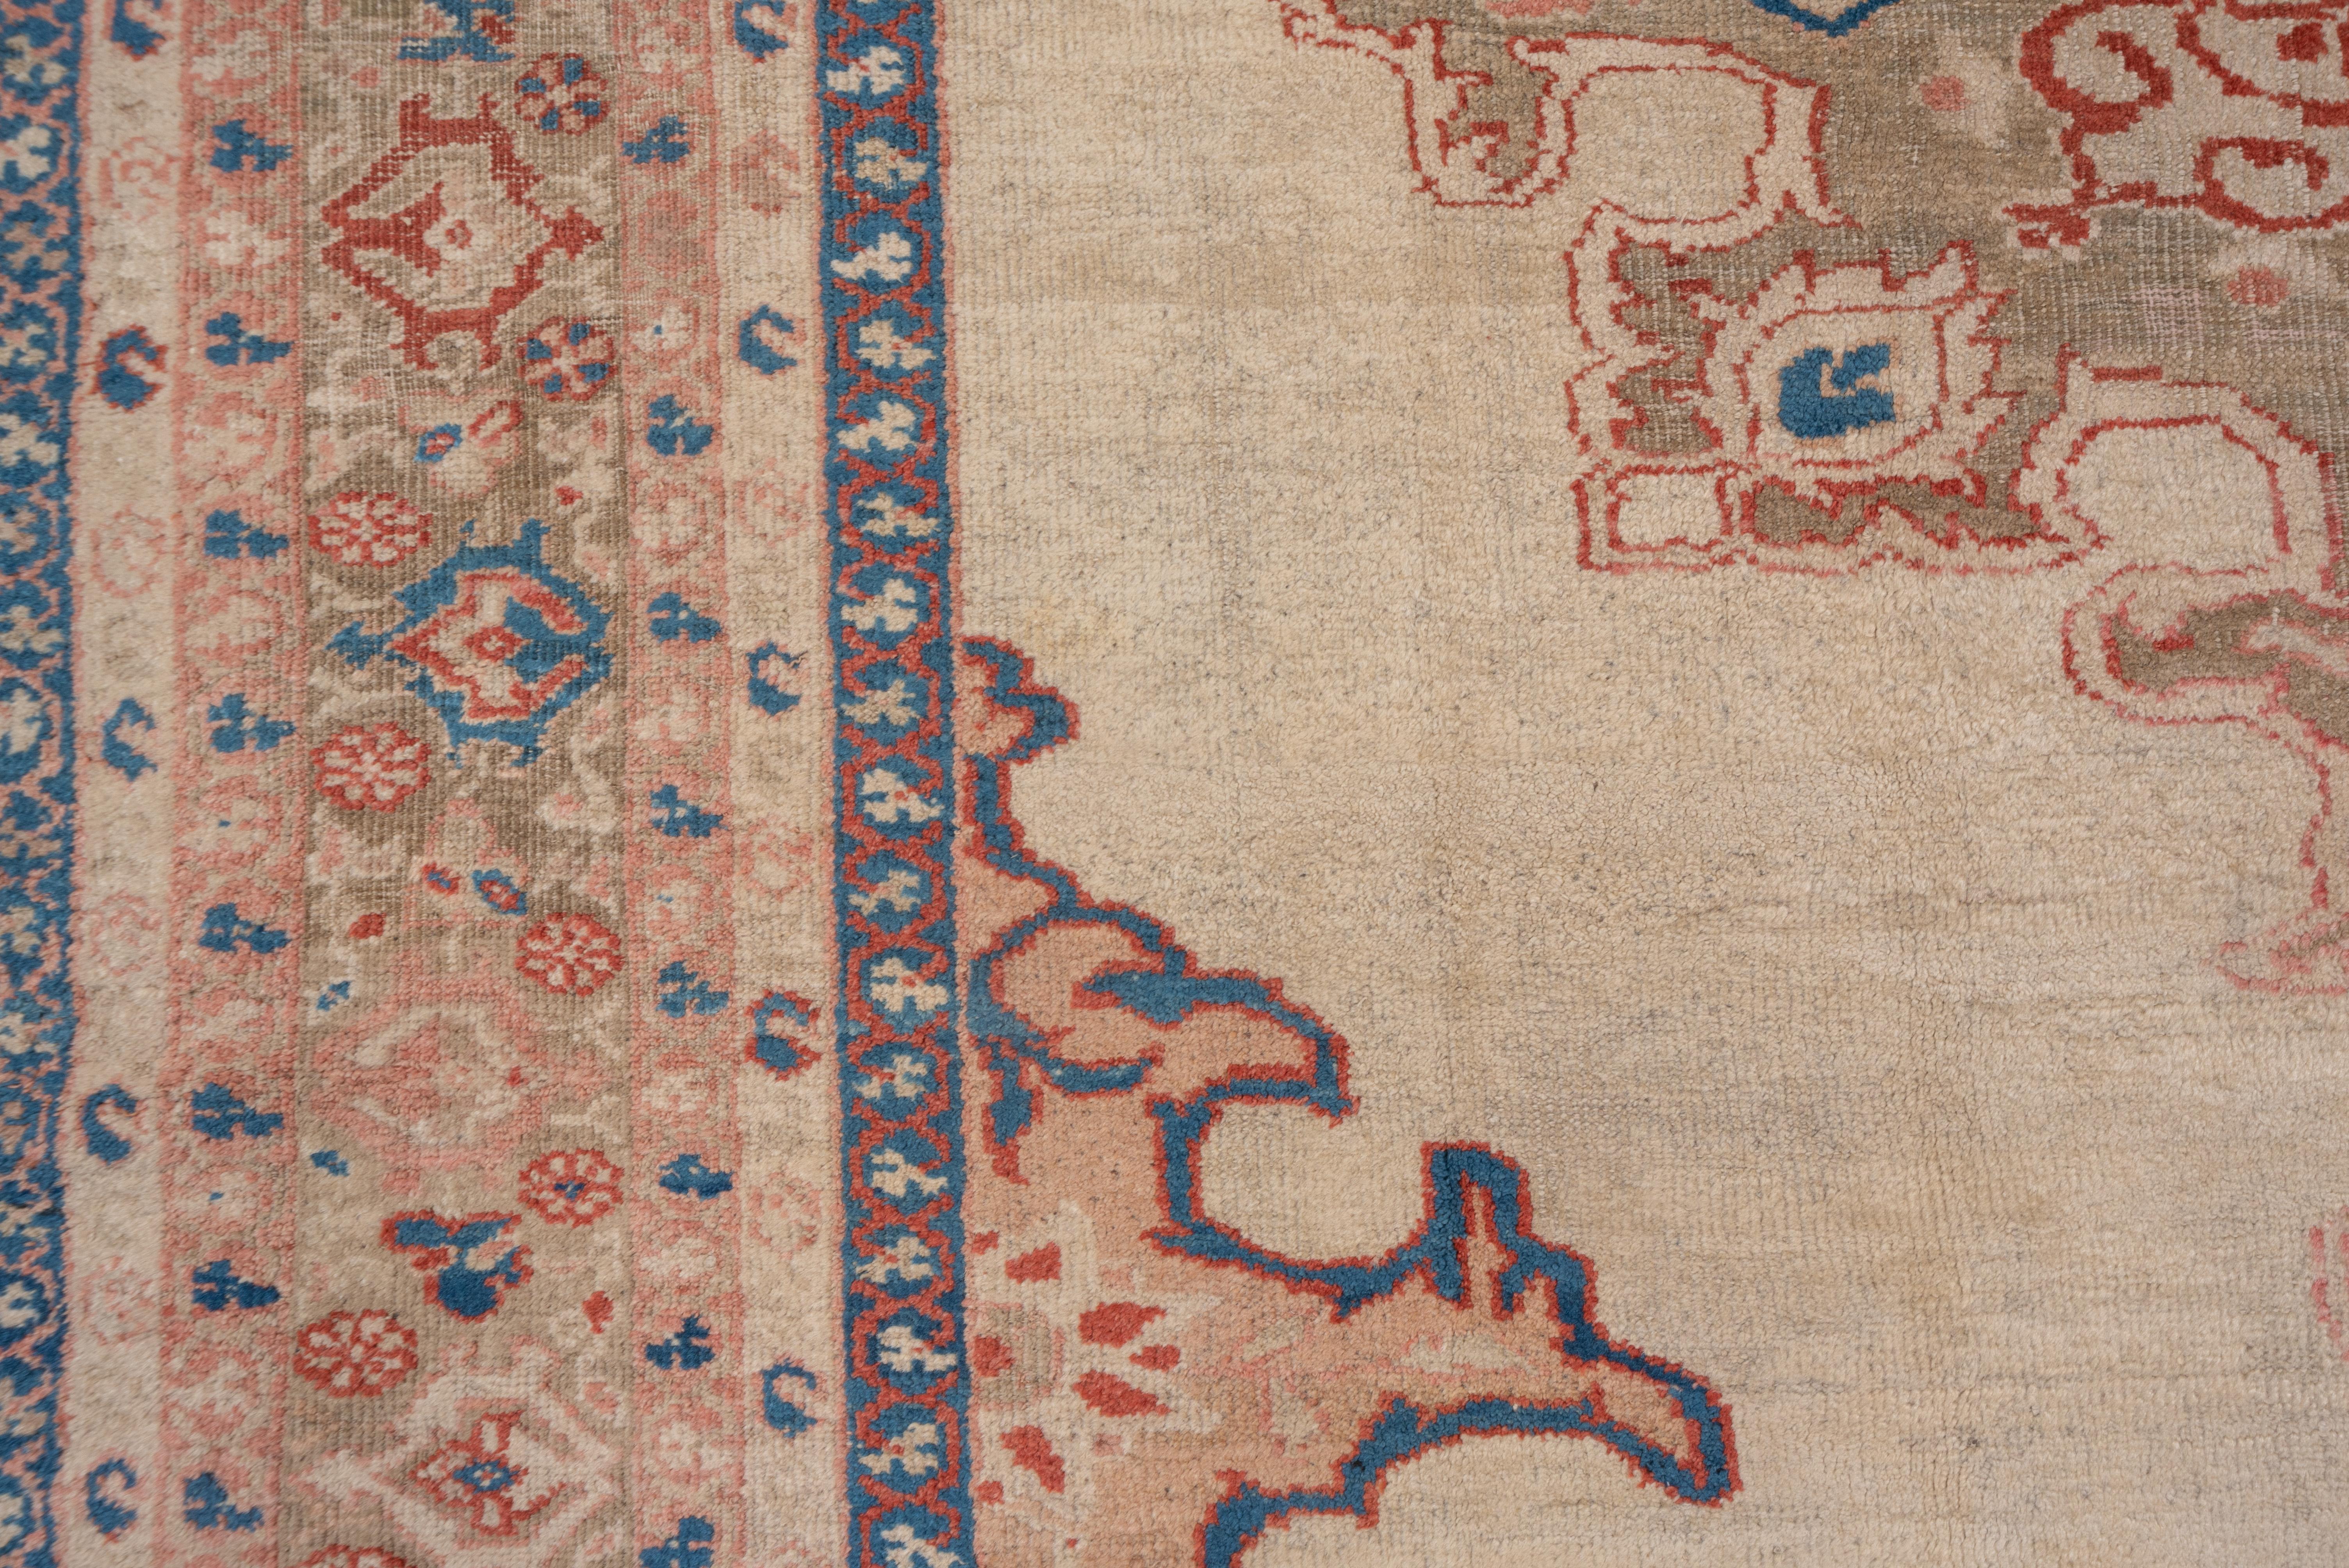 The ragged and torn corners are edged in dark blue and are exactly copied in outline mirrored in the cerulean-accented medallion set on the cream, open ground. West Persian rustic carpet with a reversing, stylized turtle palmette border.